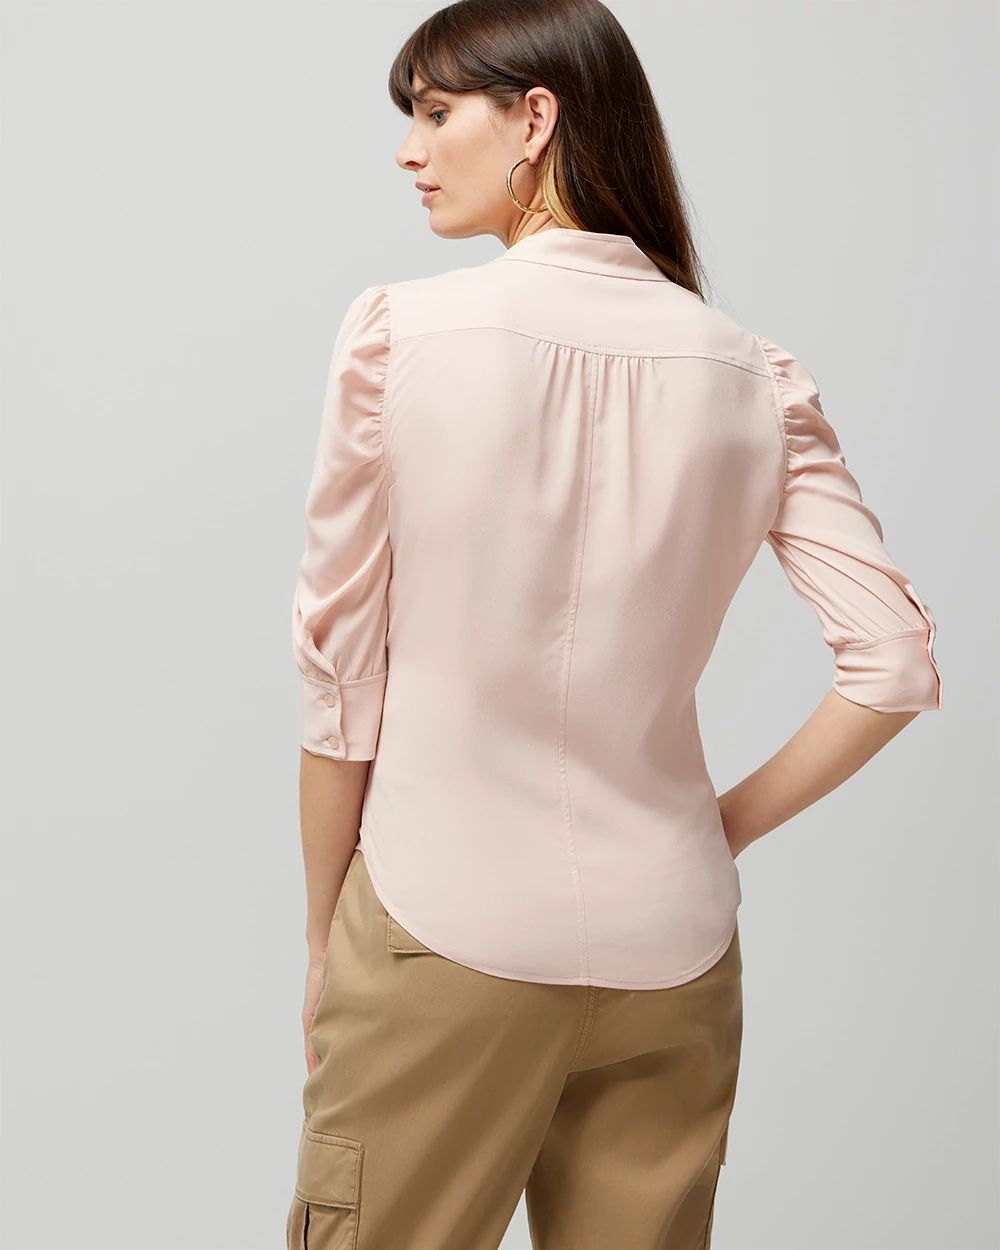 Ruched Sleeve Shirt